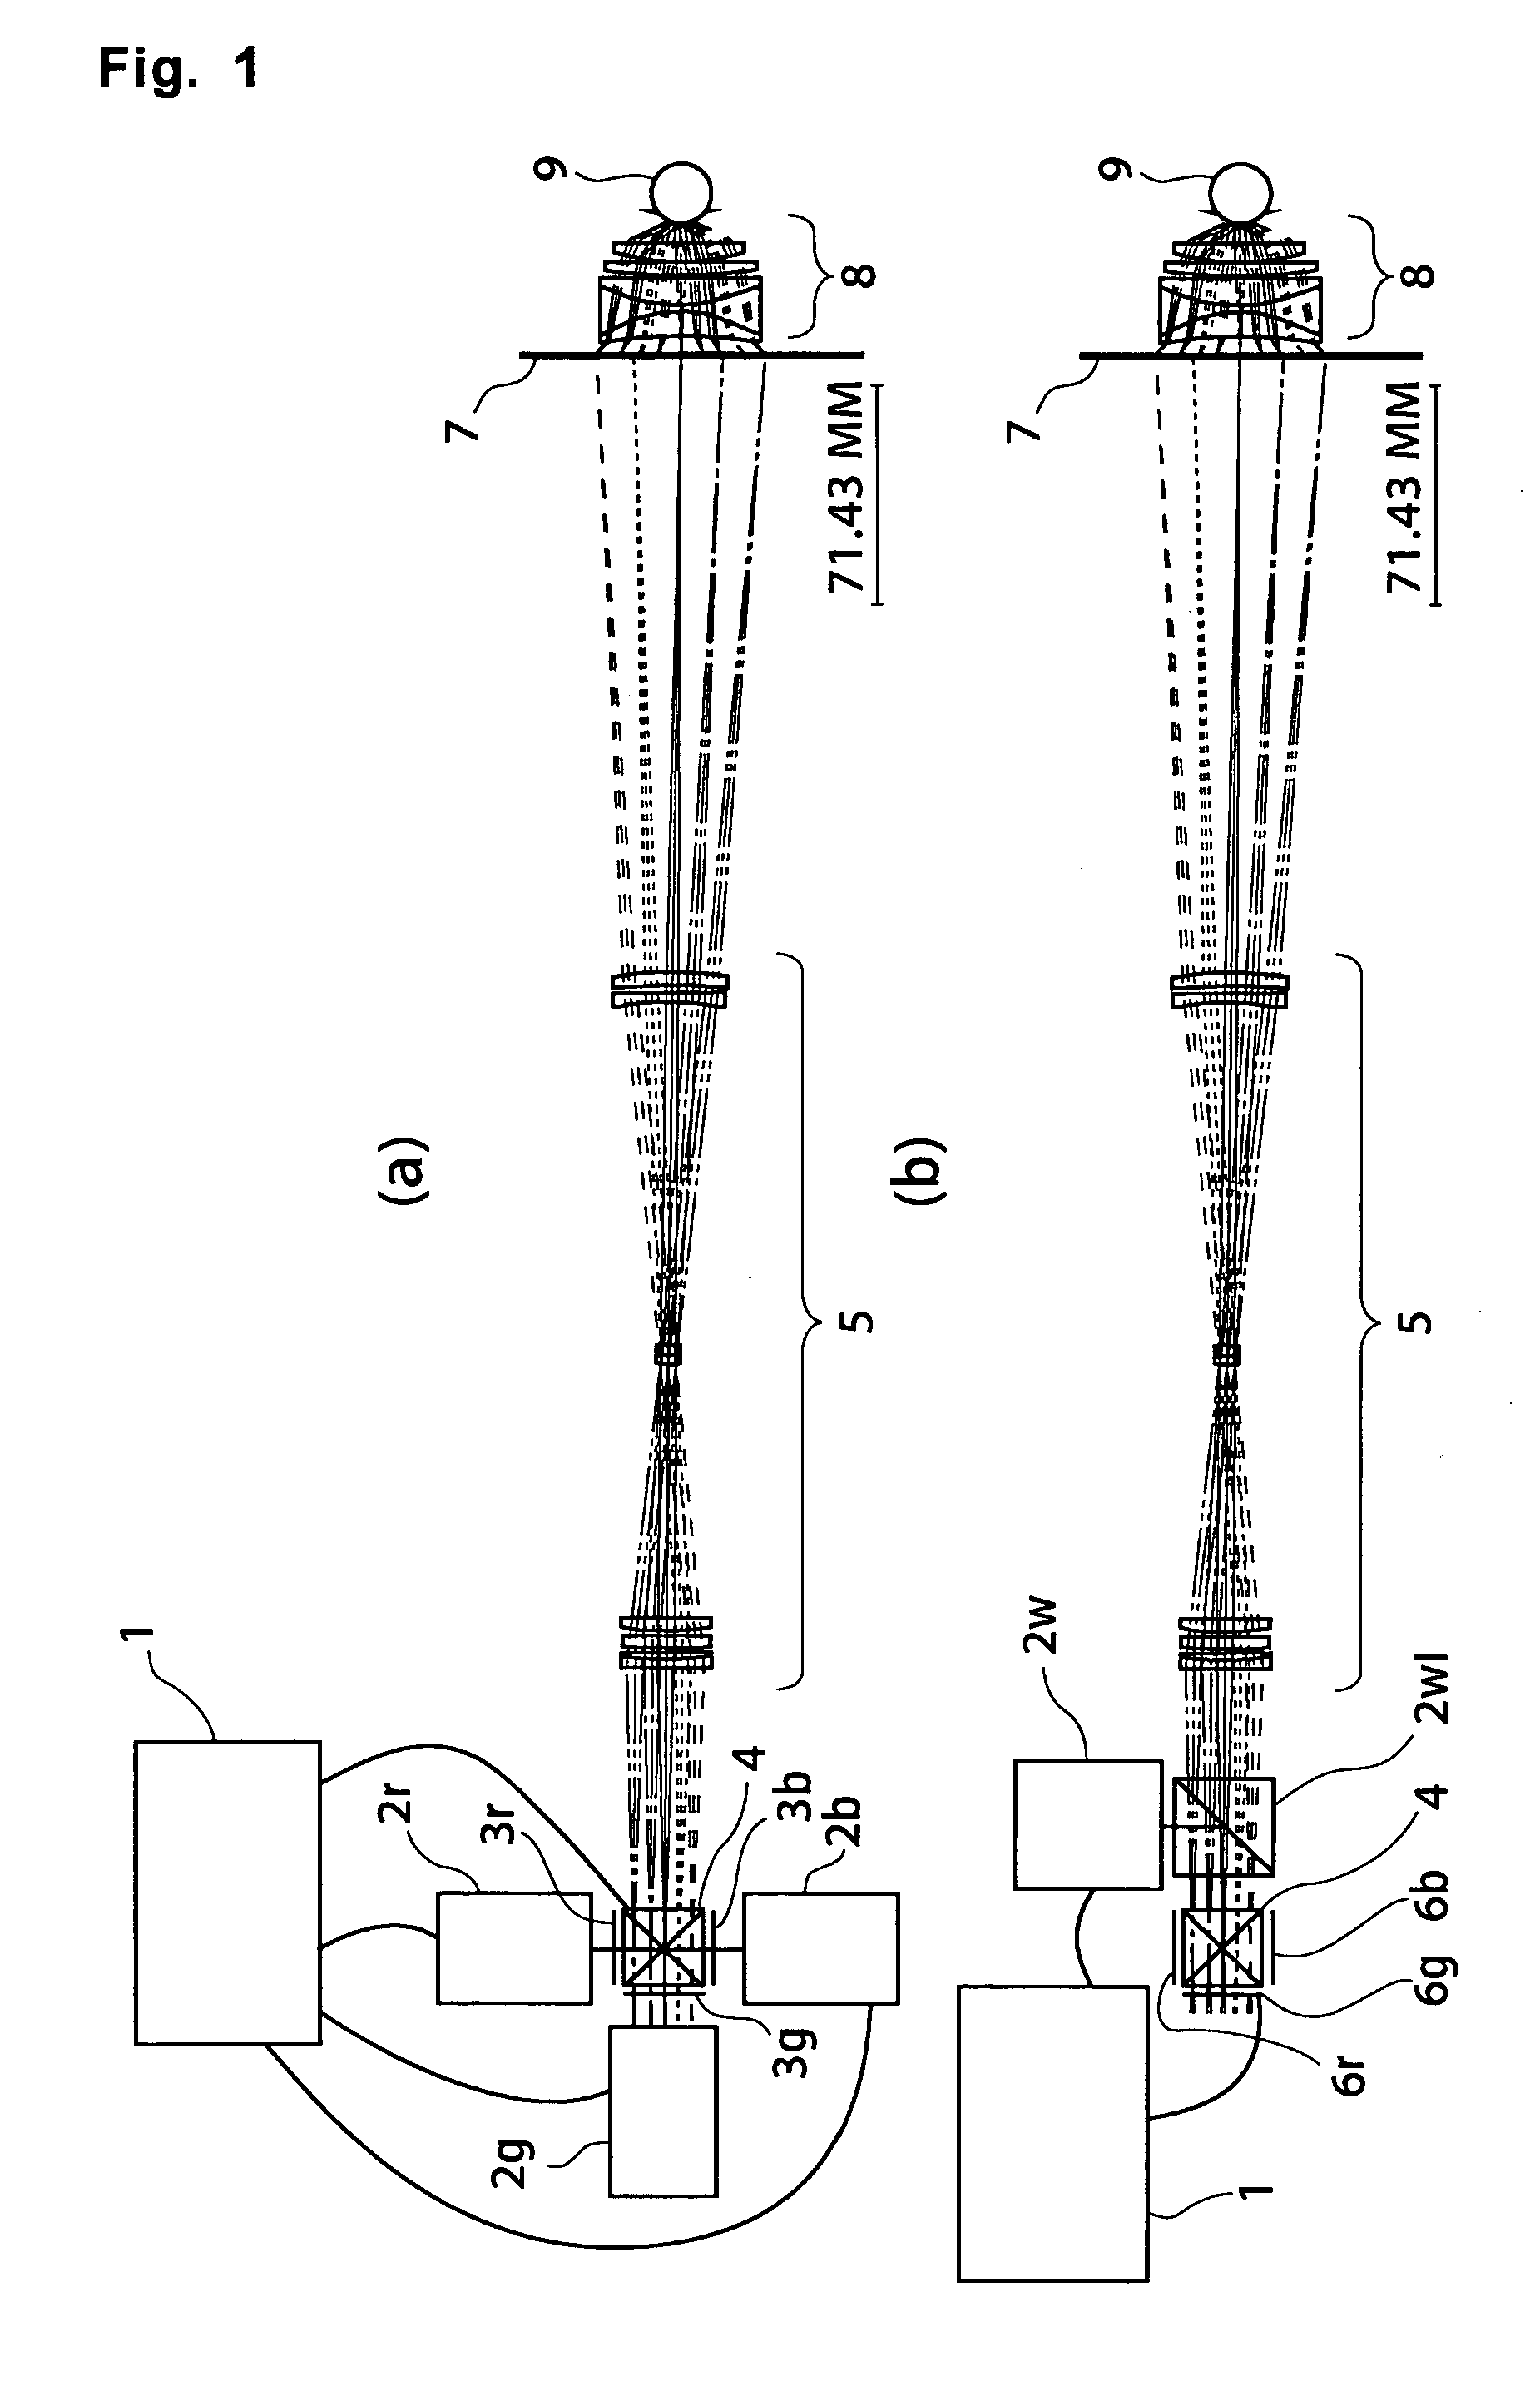 Image display device and simulation device